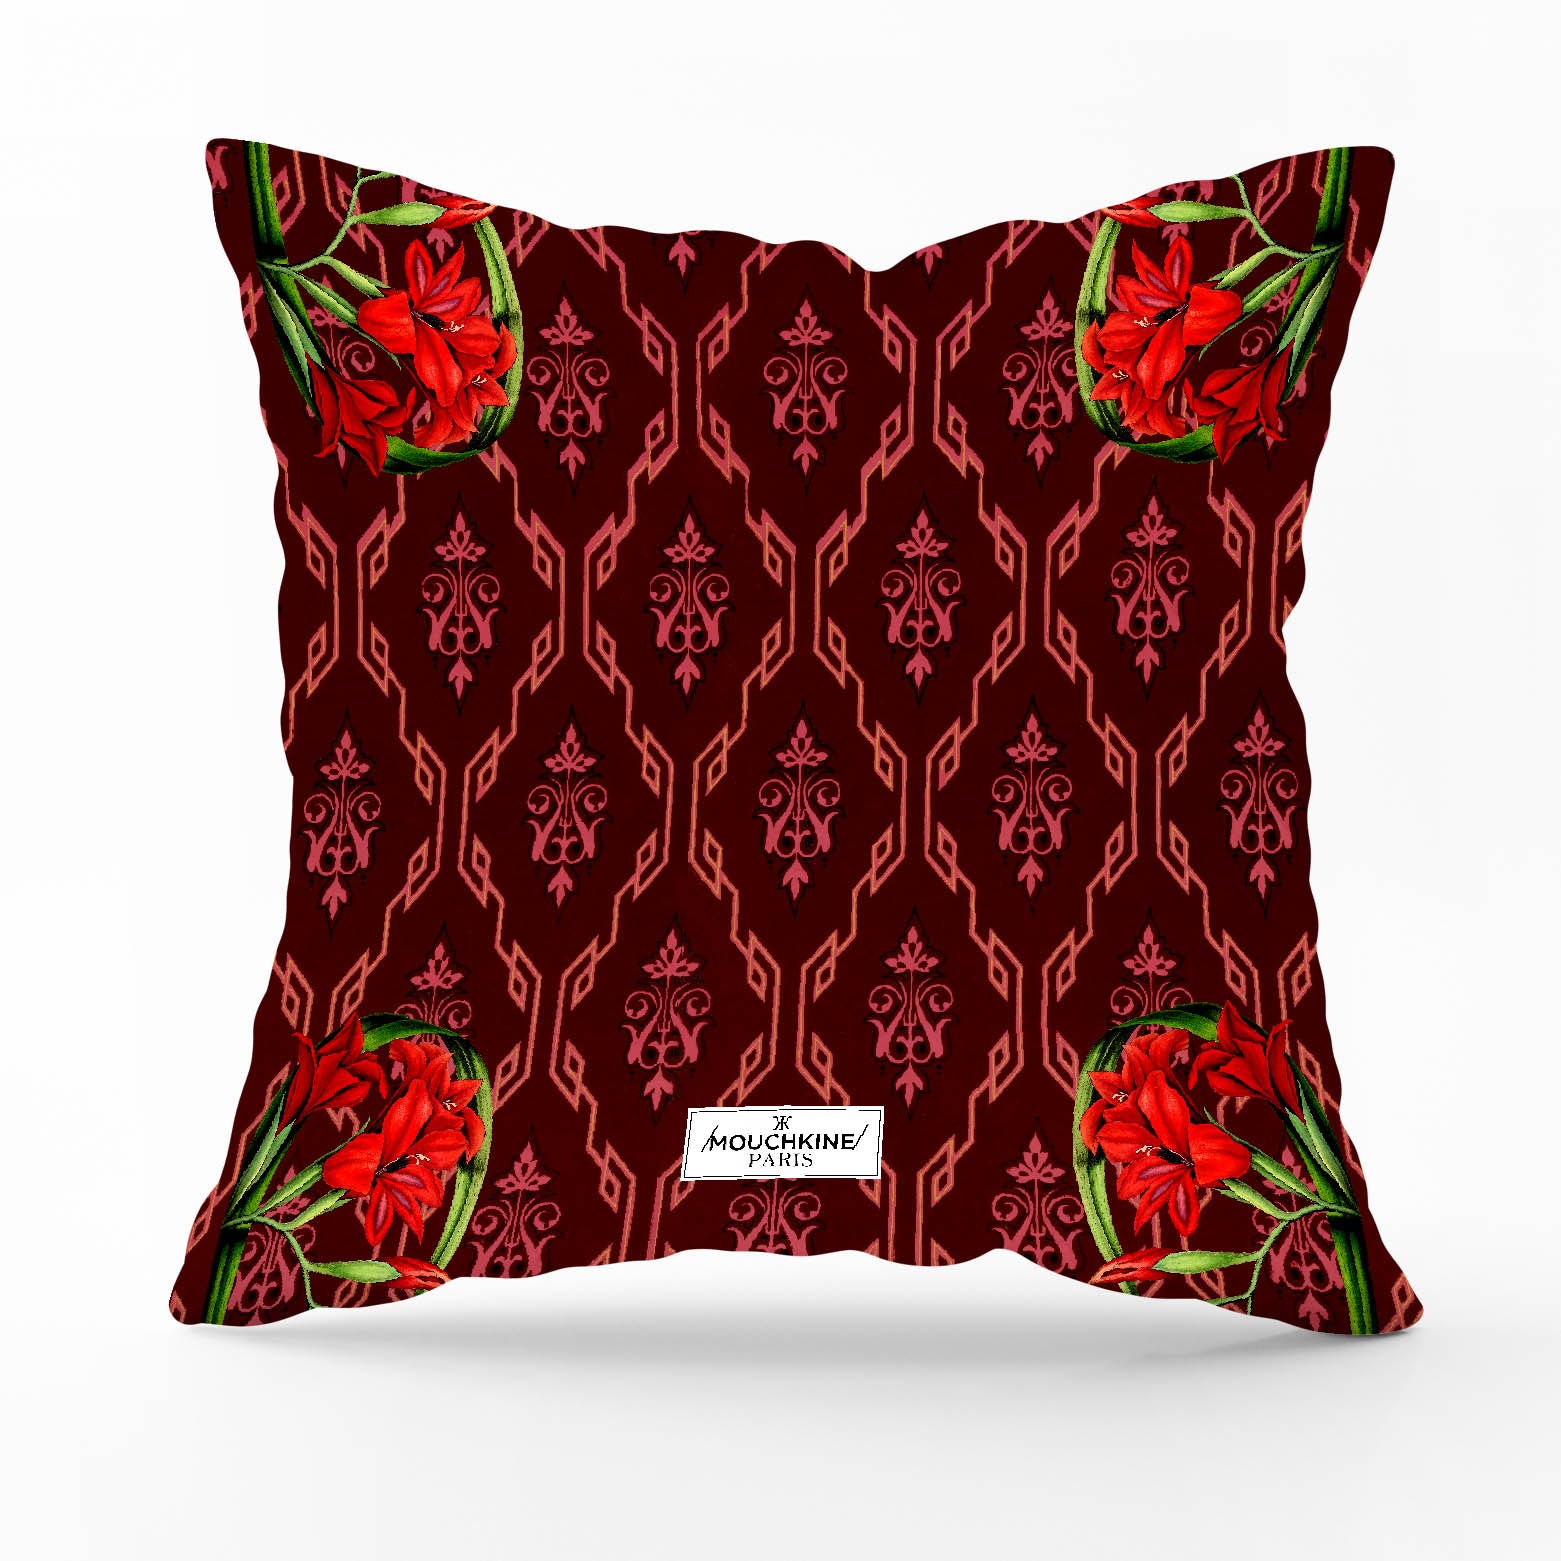 mouchkine jewelry housse coussin velour luxe ecureuil design cushion covers